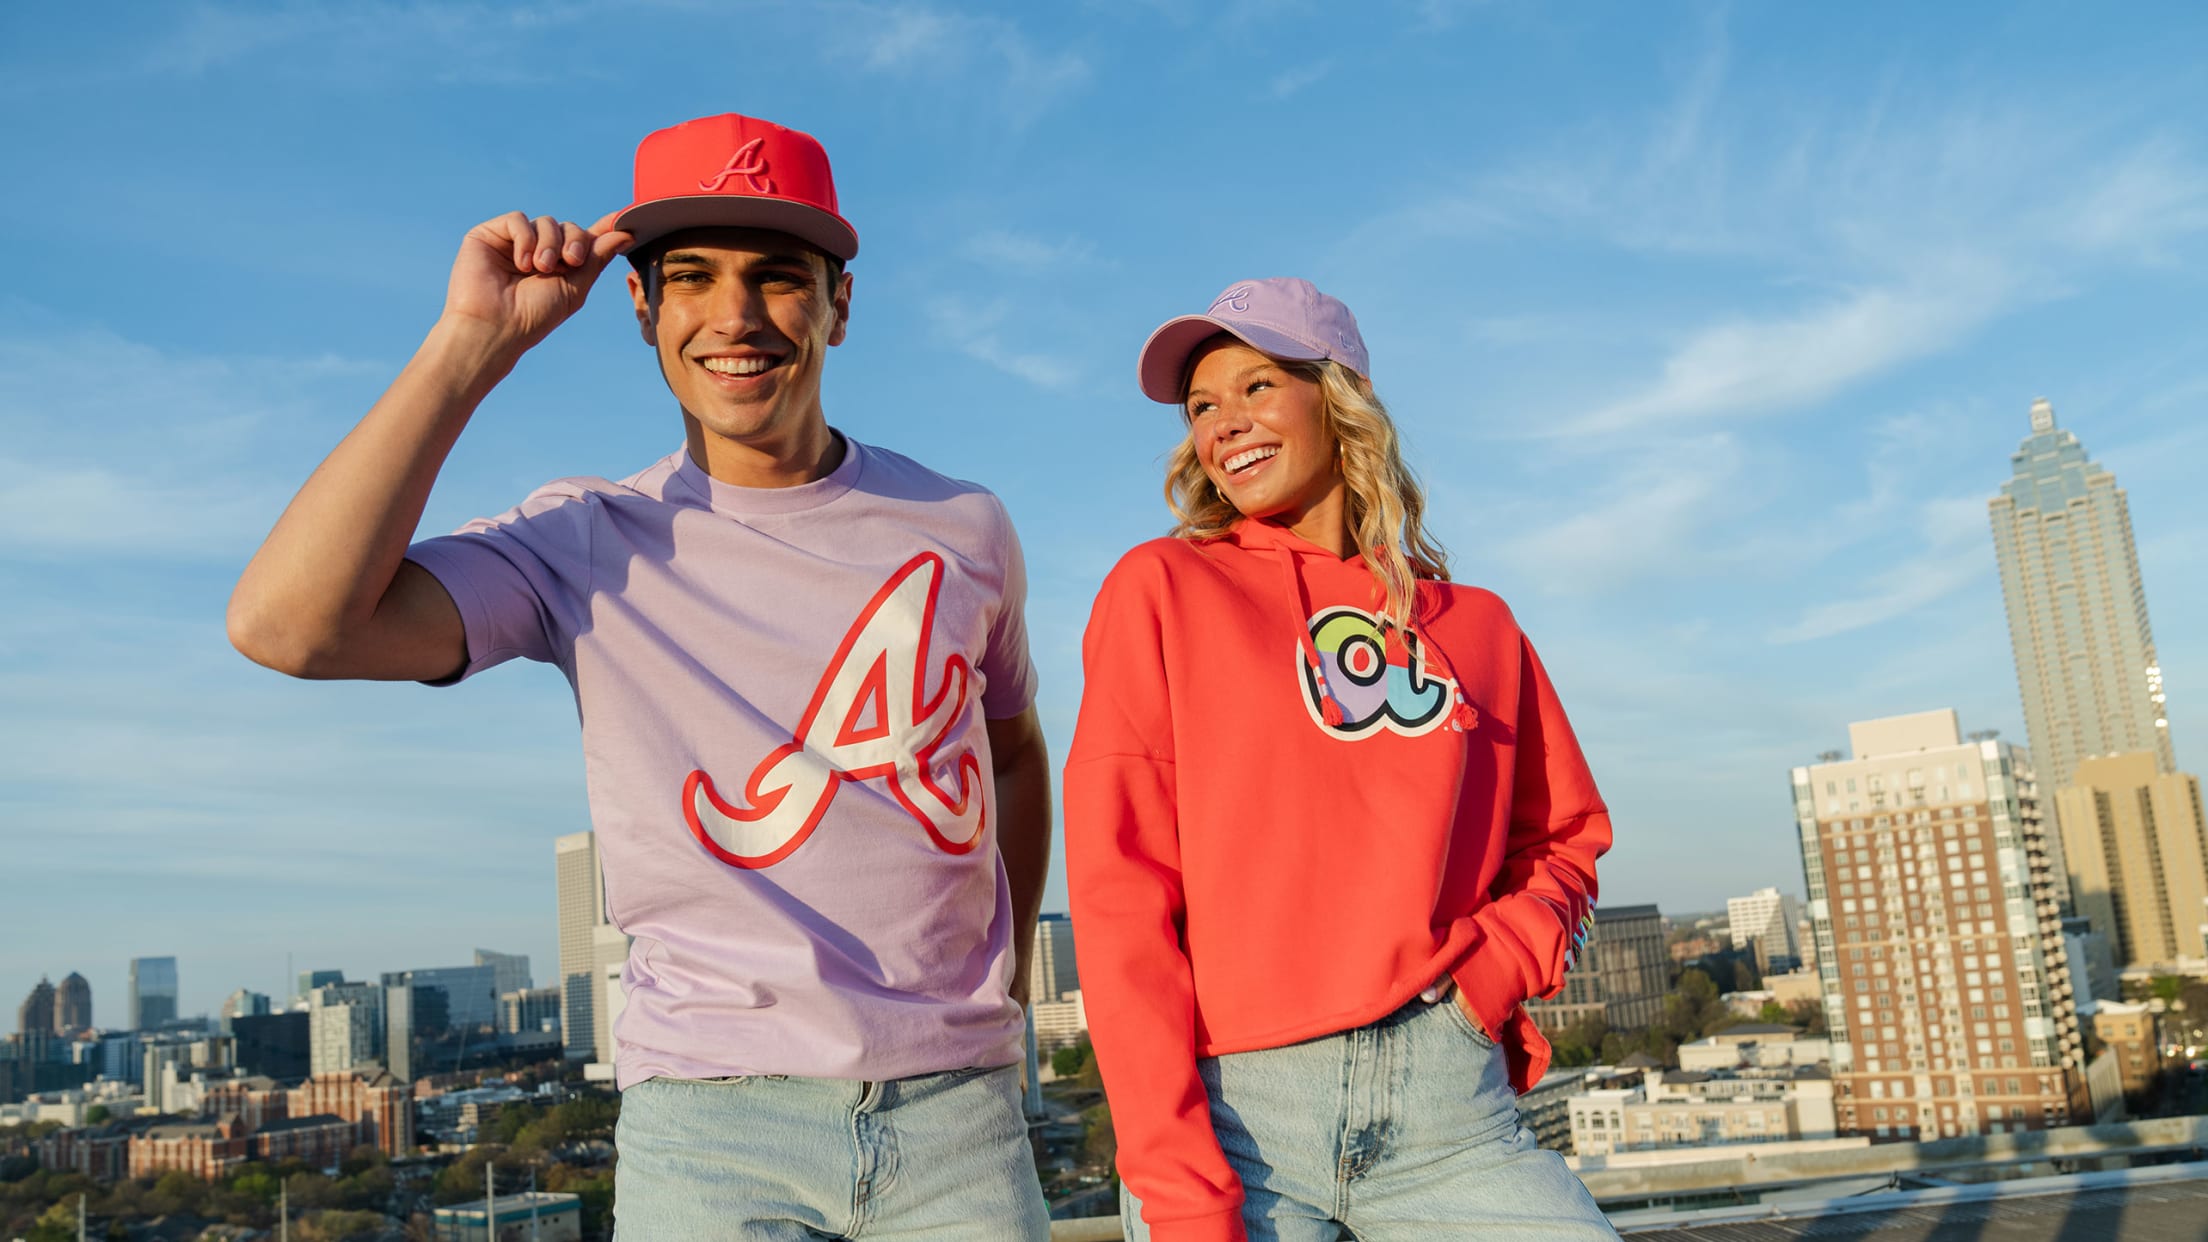 Get your Braves gameday gear just in time for Postseason at @bravesthreads!  ⚾